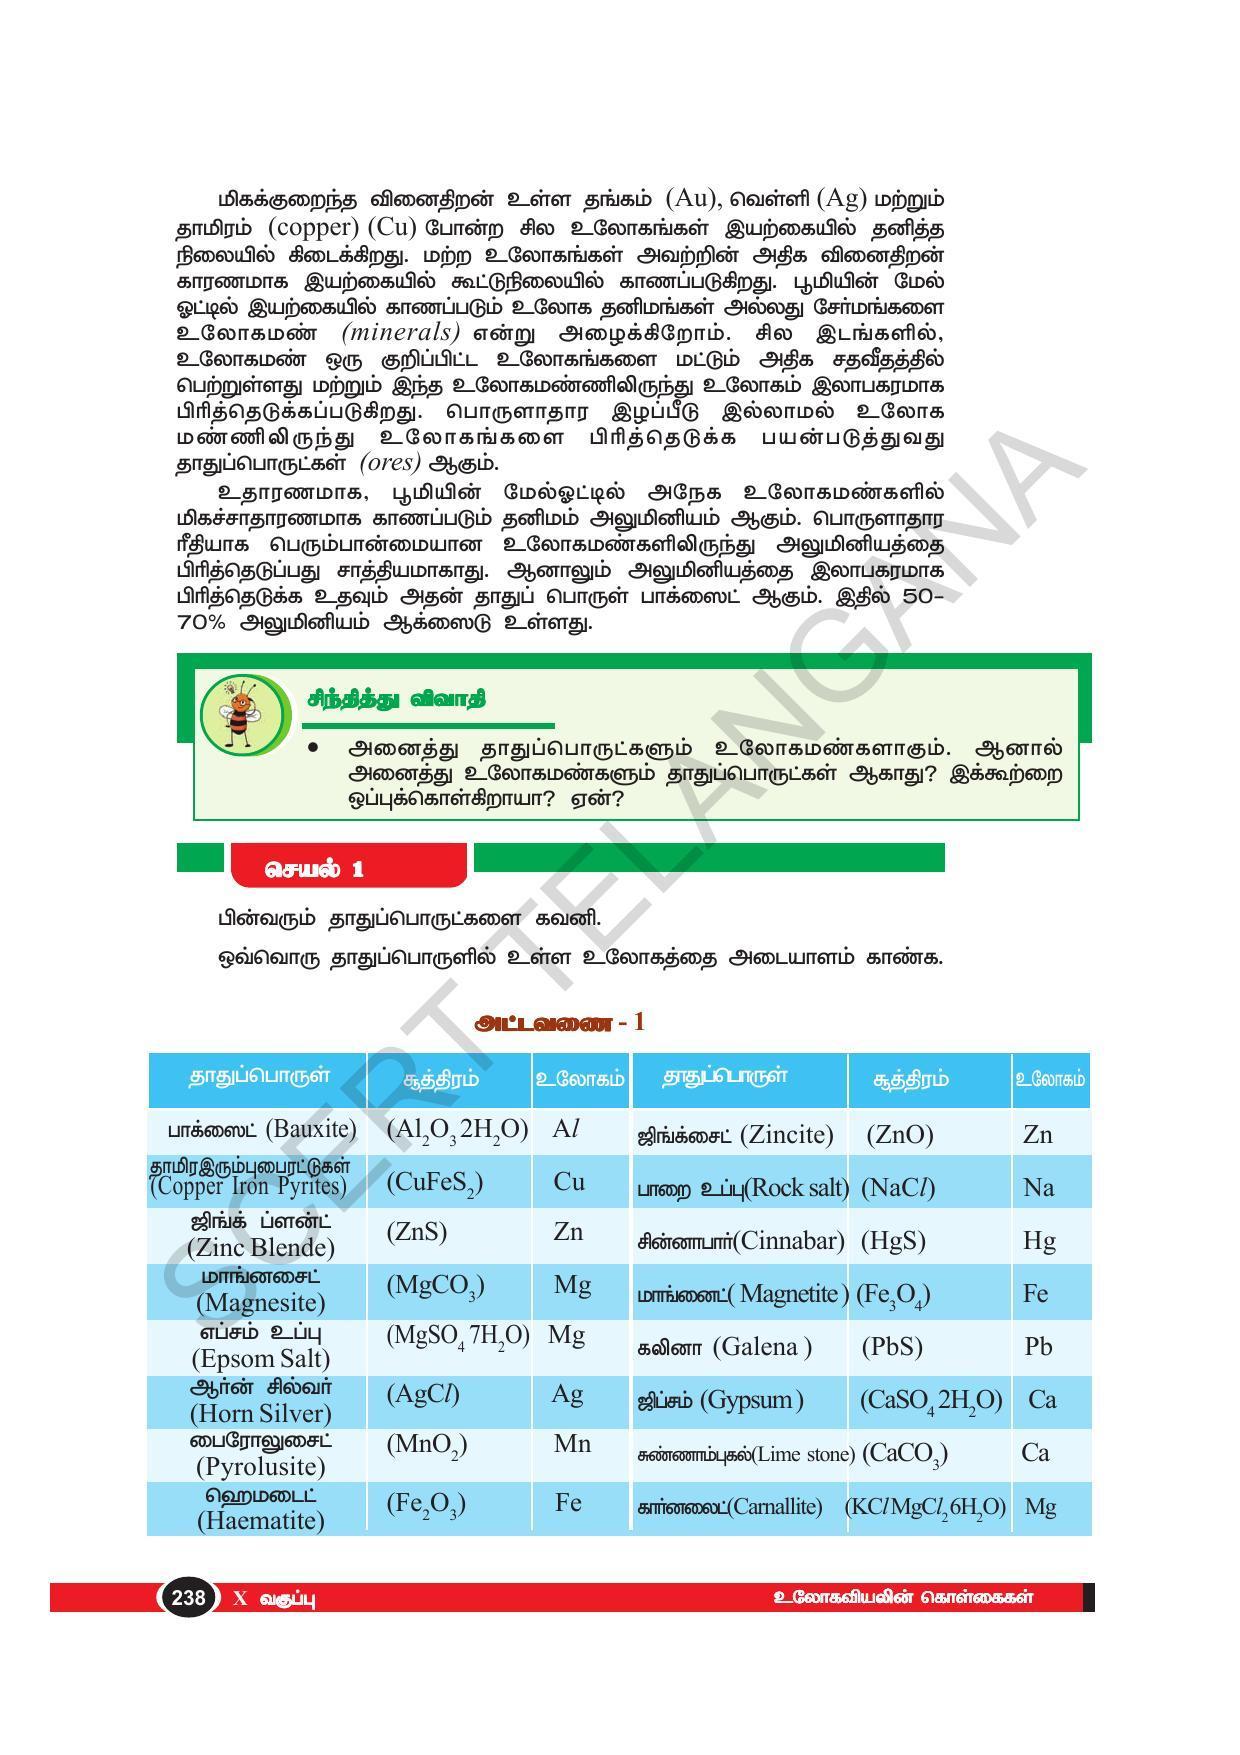 TS SCERT Class 10 Physical Science(Tamil Medium) Text Book - Page 250